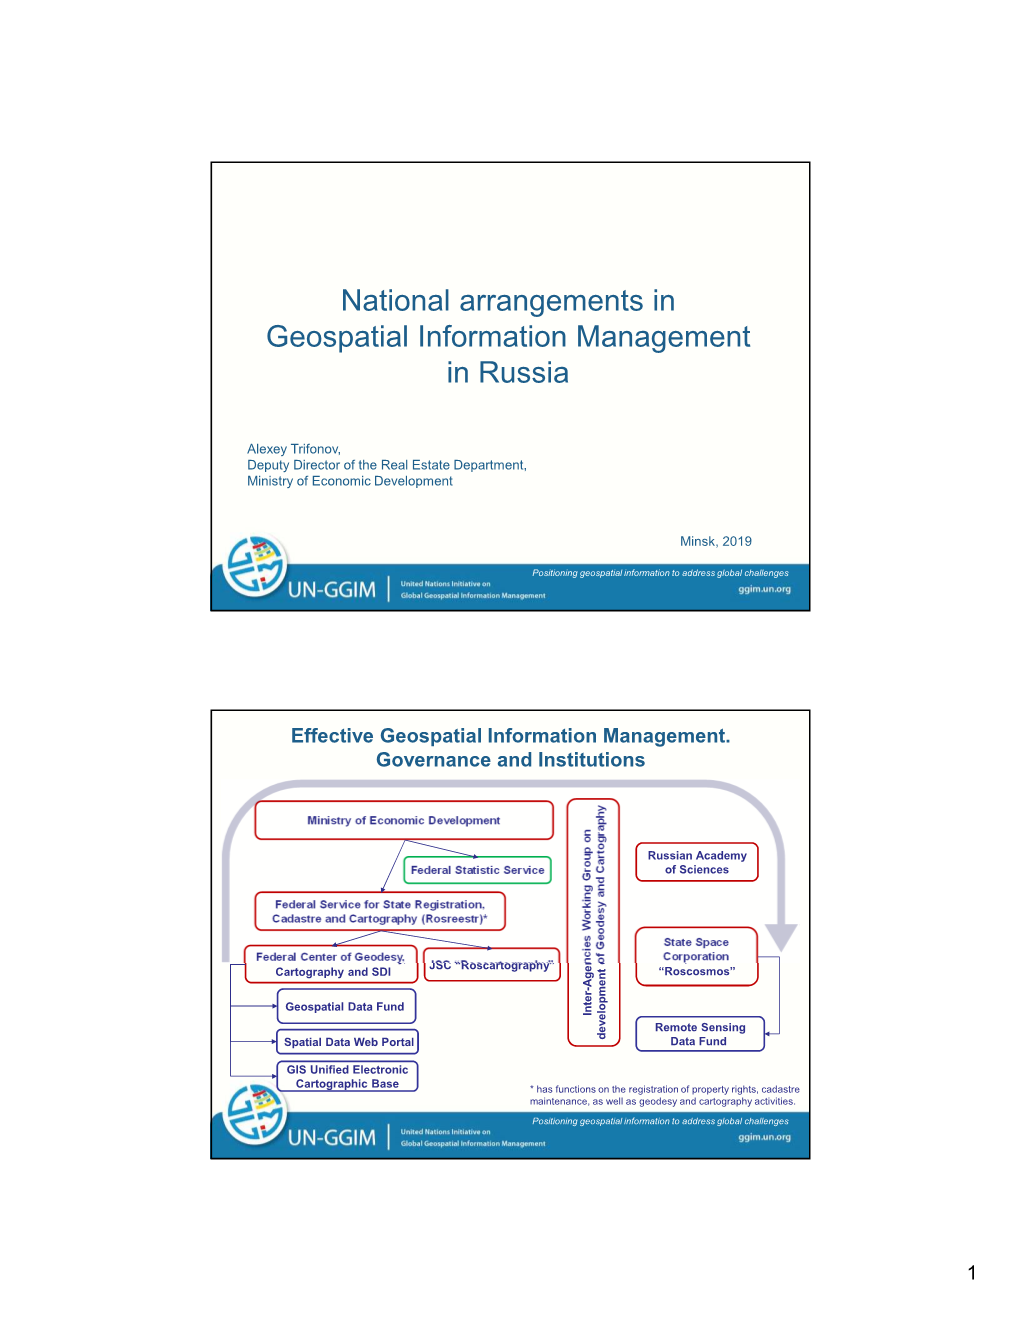 National Arrangements in Geospatial Information Management in Russia